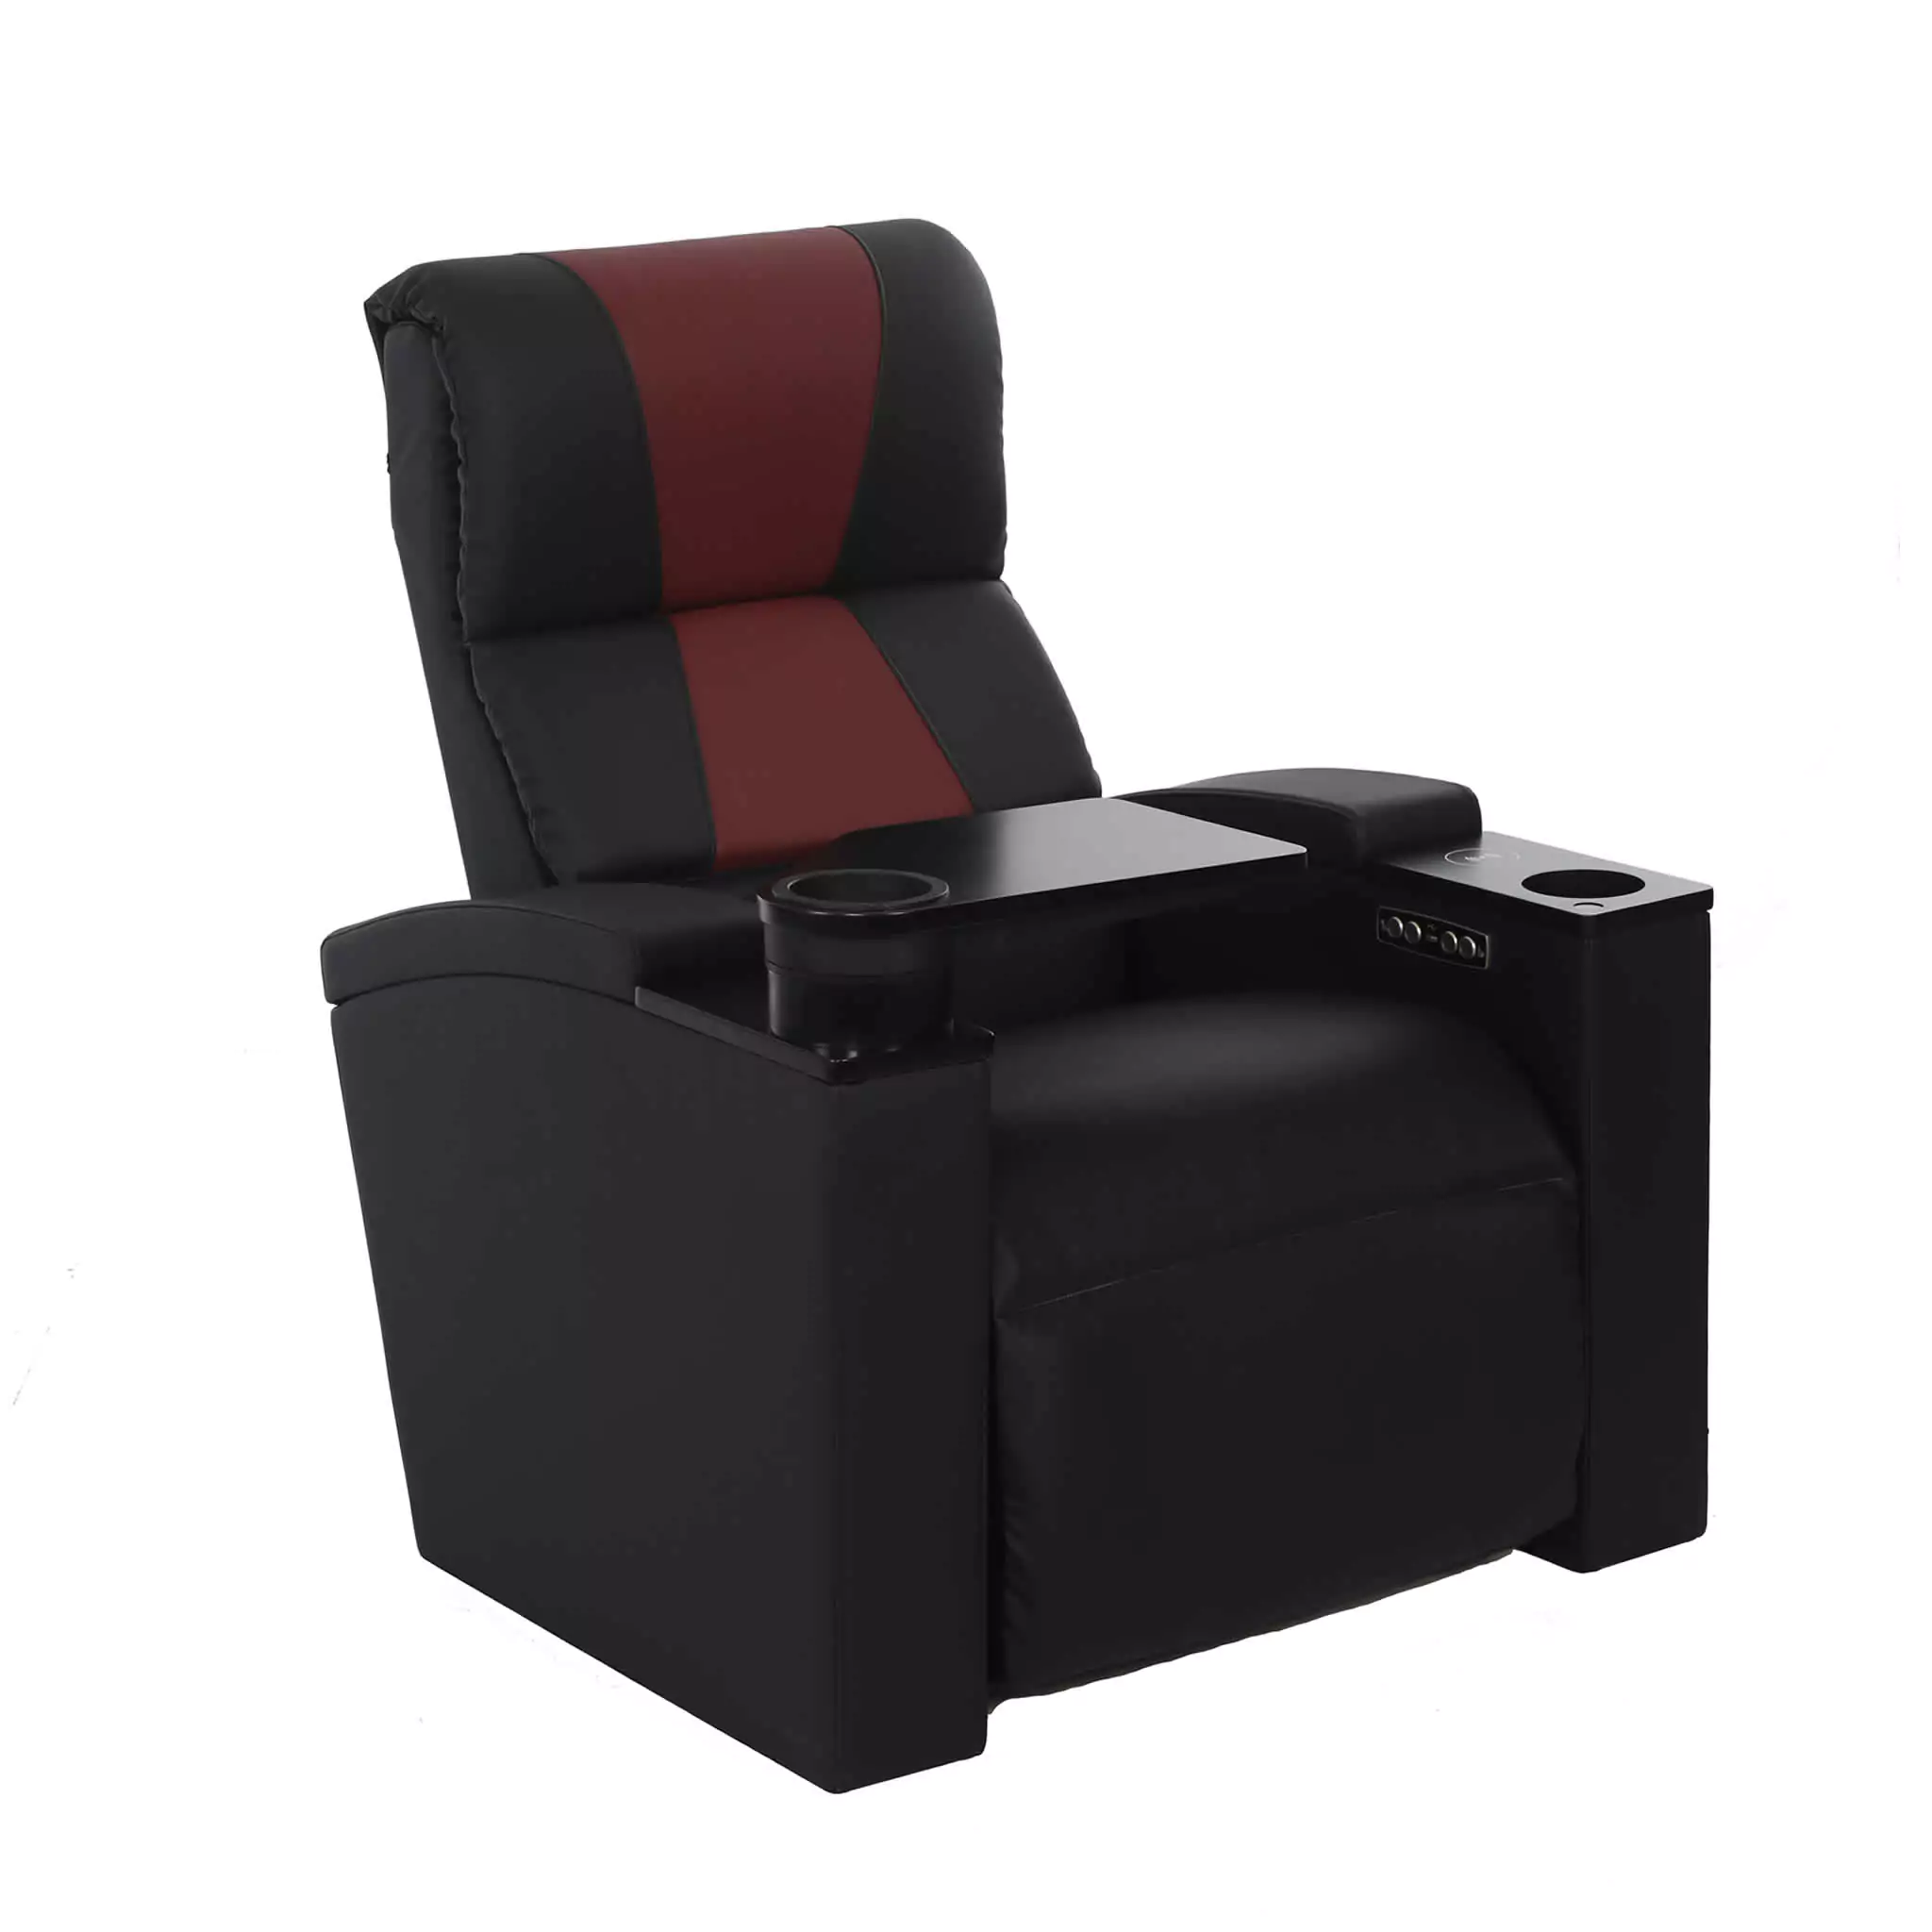 Simko Seating Products Recliner Cinema Seat Monstone 03